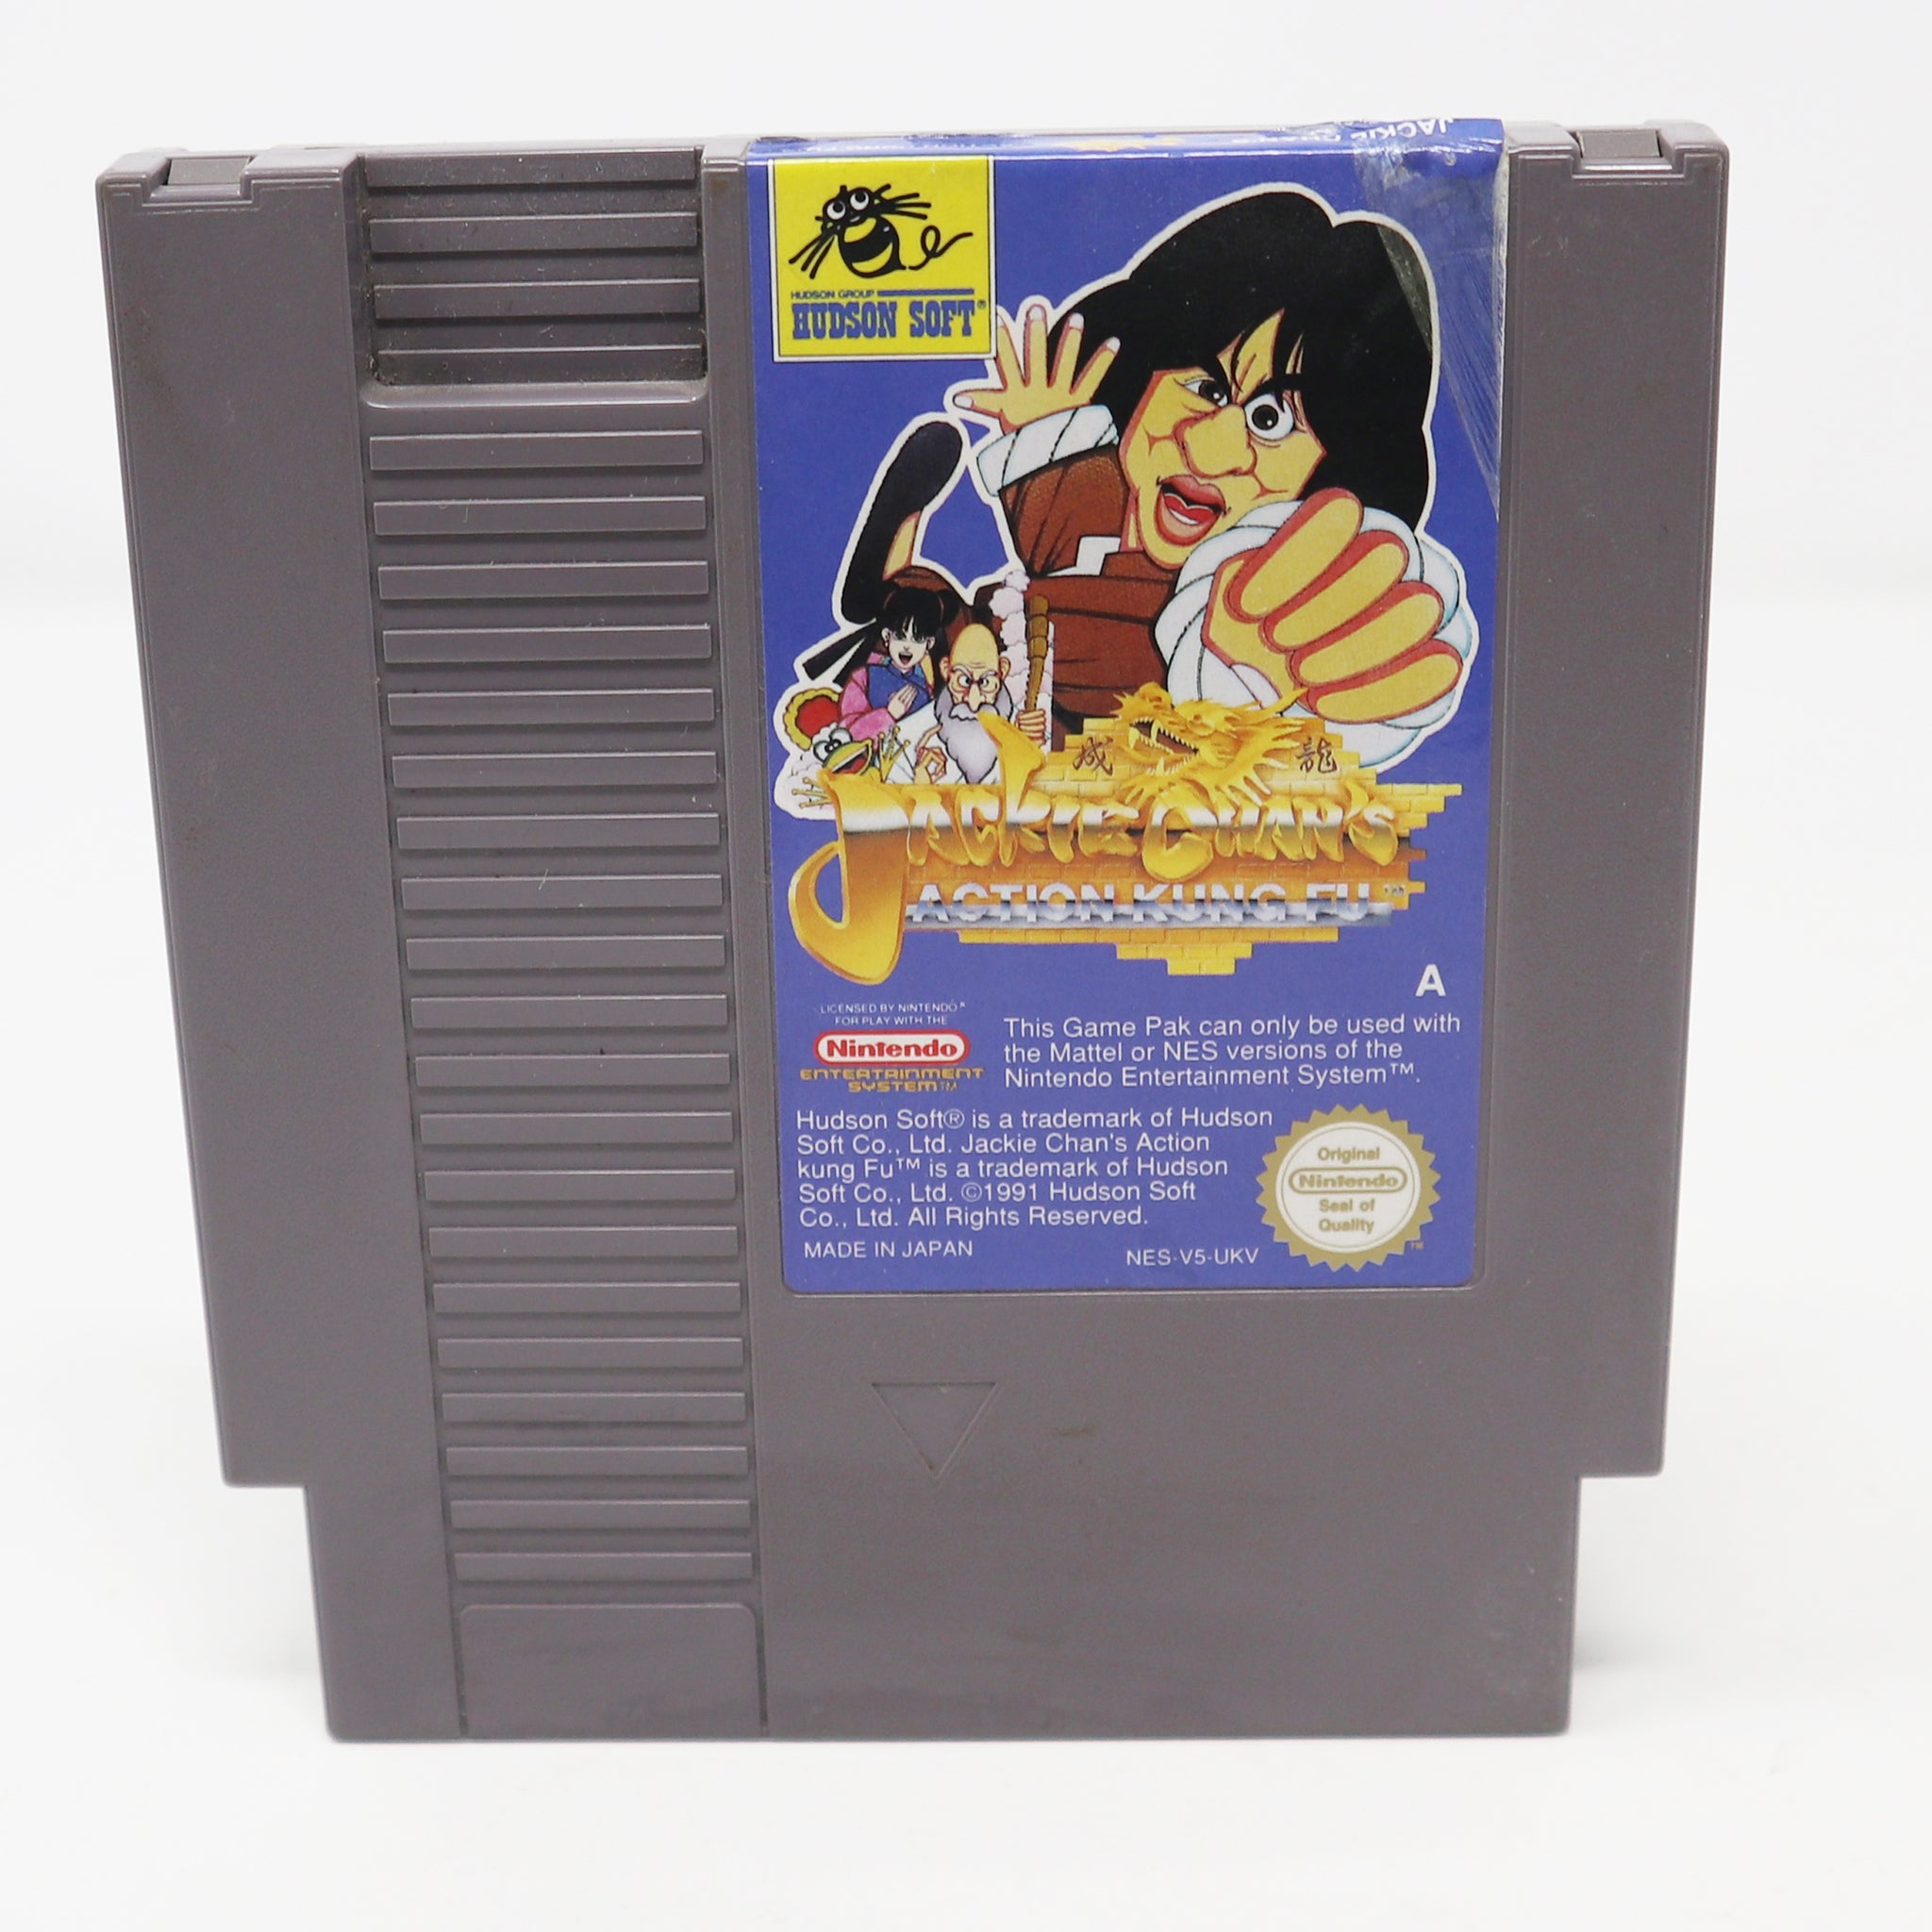 Vintage 1991 90s Nintendo Entertainment System NES Jackie Chan's Action Kung Fu Video Game Pal A